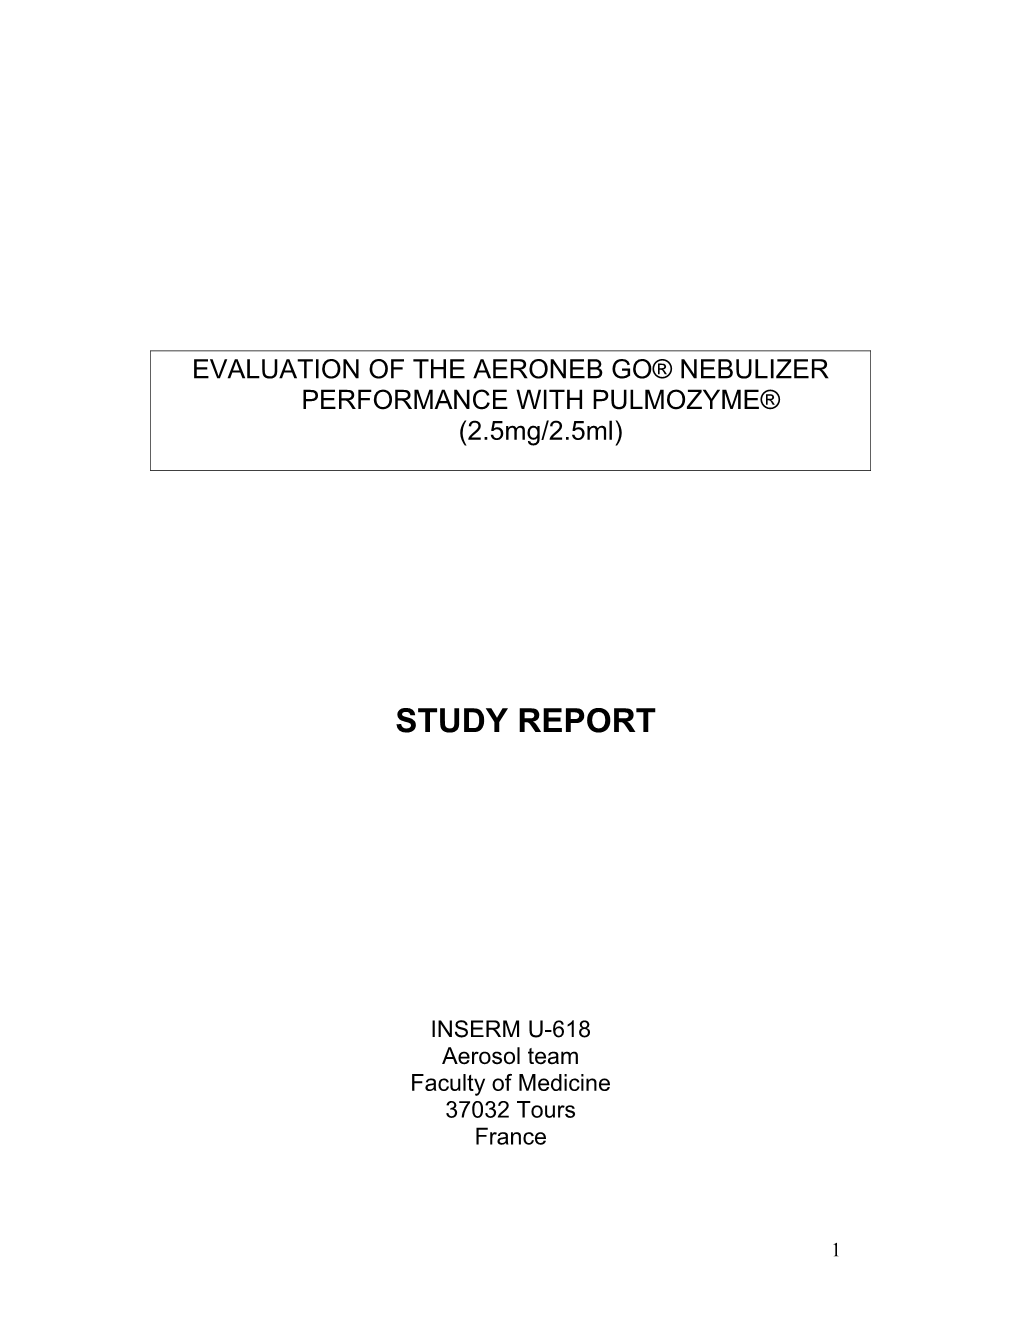 Evaluation of the Performance Of